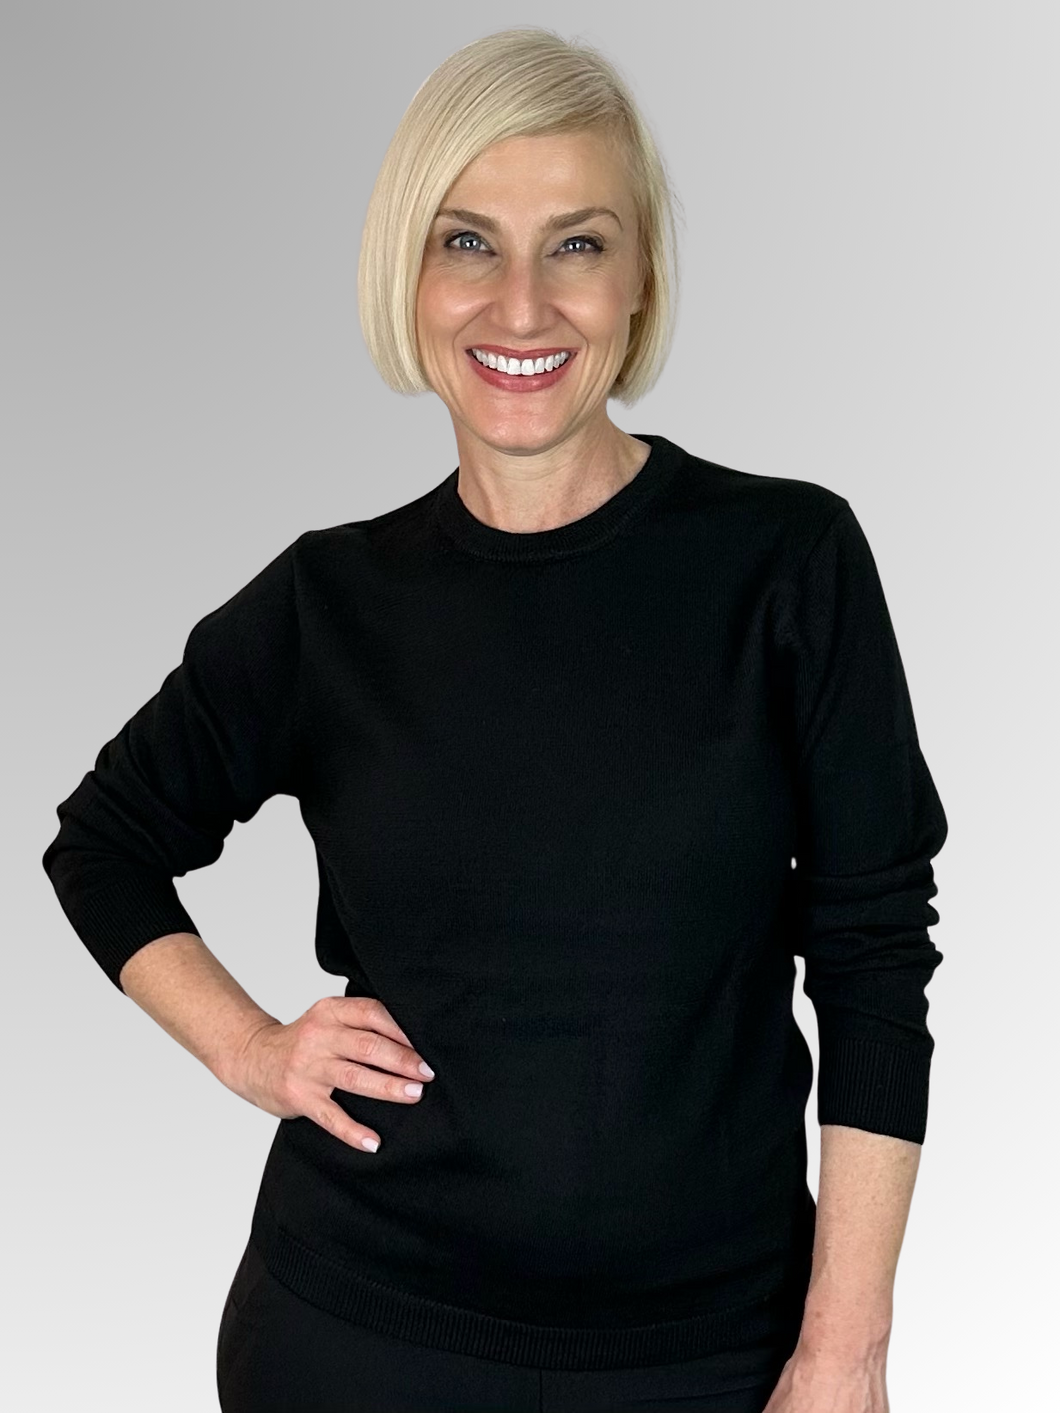 Slade Knitwear is an iconic Australian brand that has been designing and manufacturing quality women's knitwear for over 70 years. Made from Pure New Wool our Crew Neck Pullover is a true classic. Available in a range of great colours, you can't go past Slade for winter knitwear.